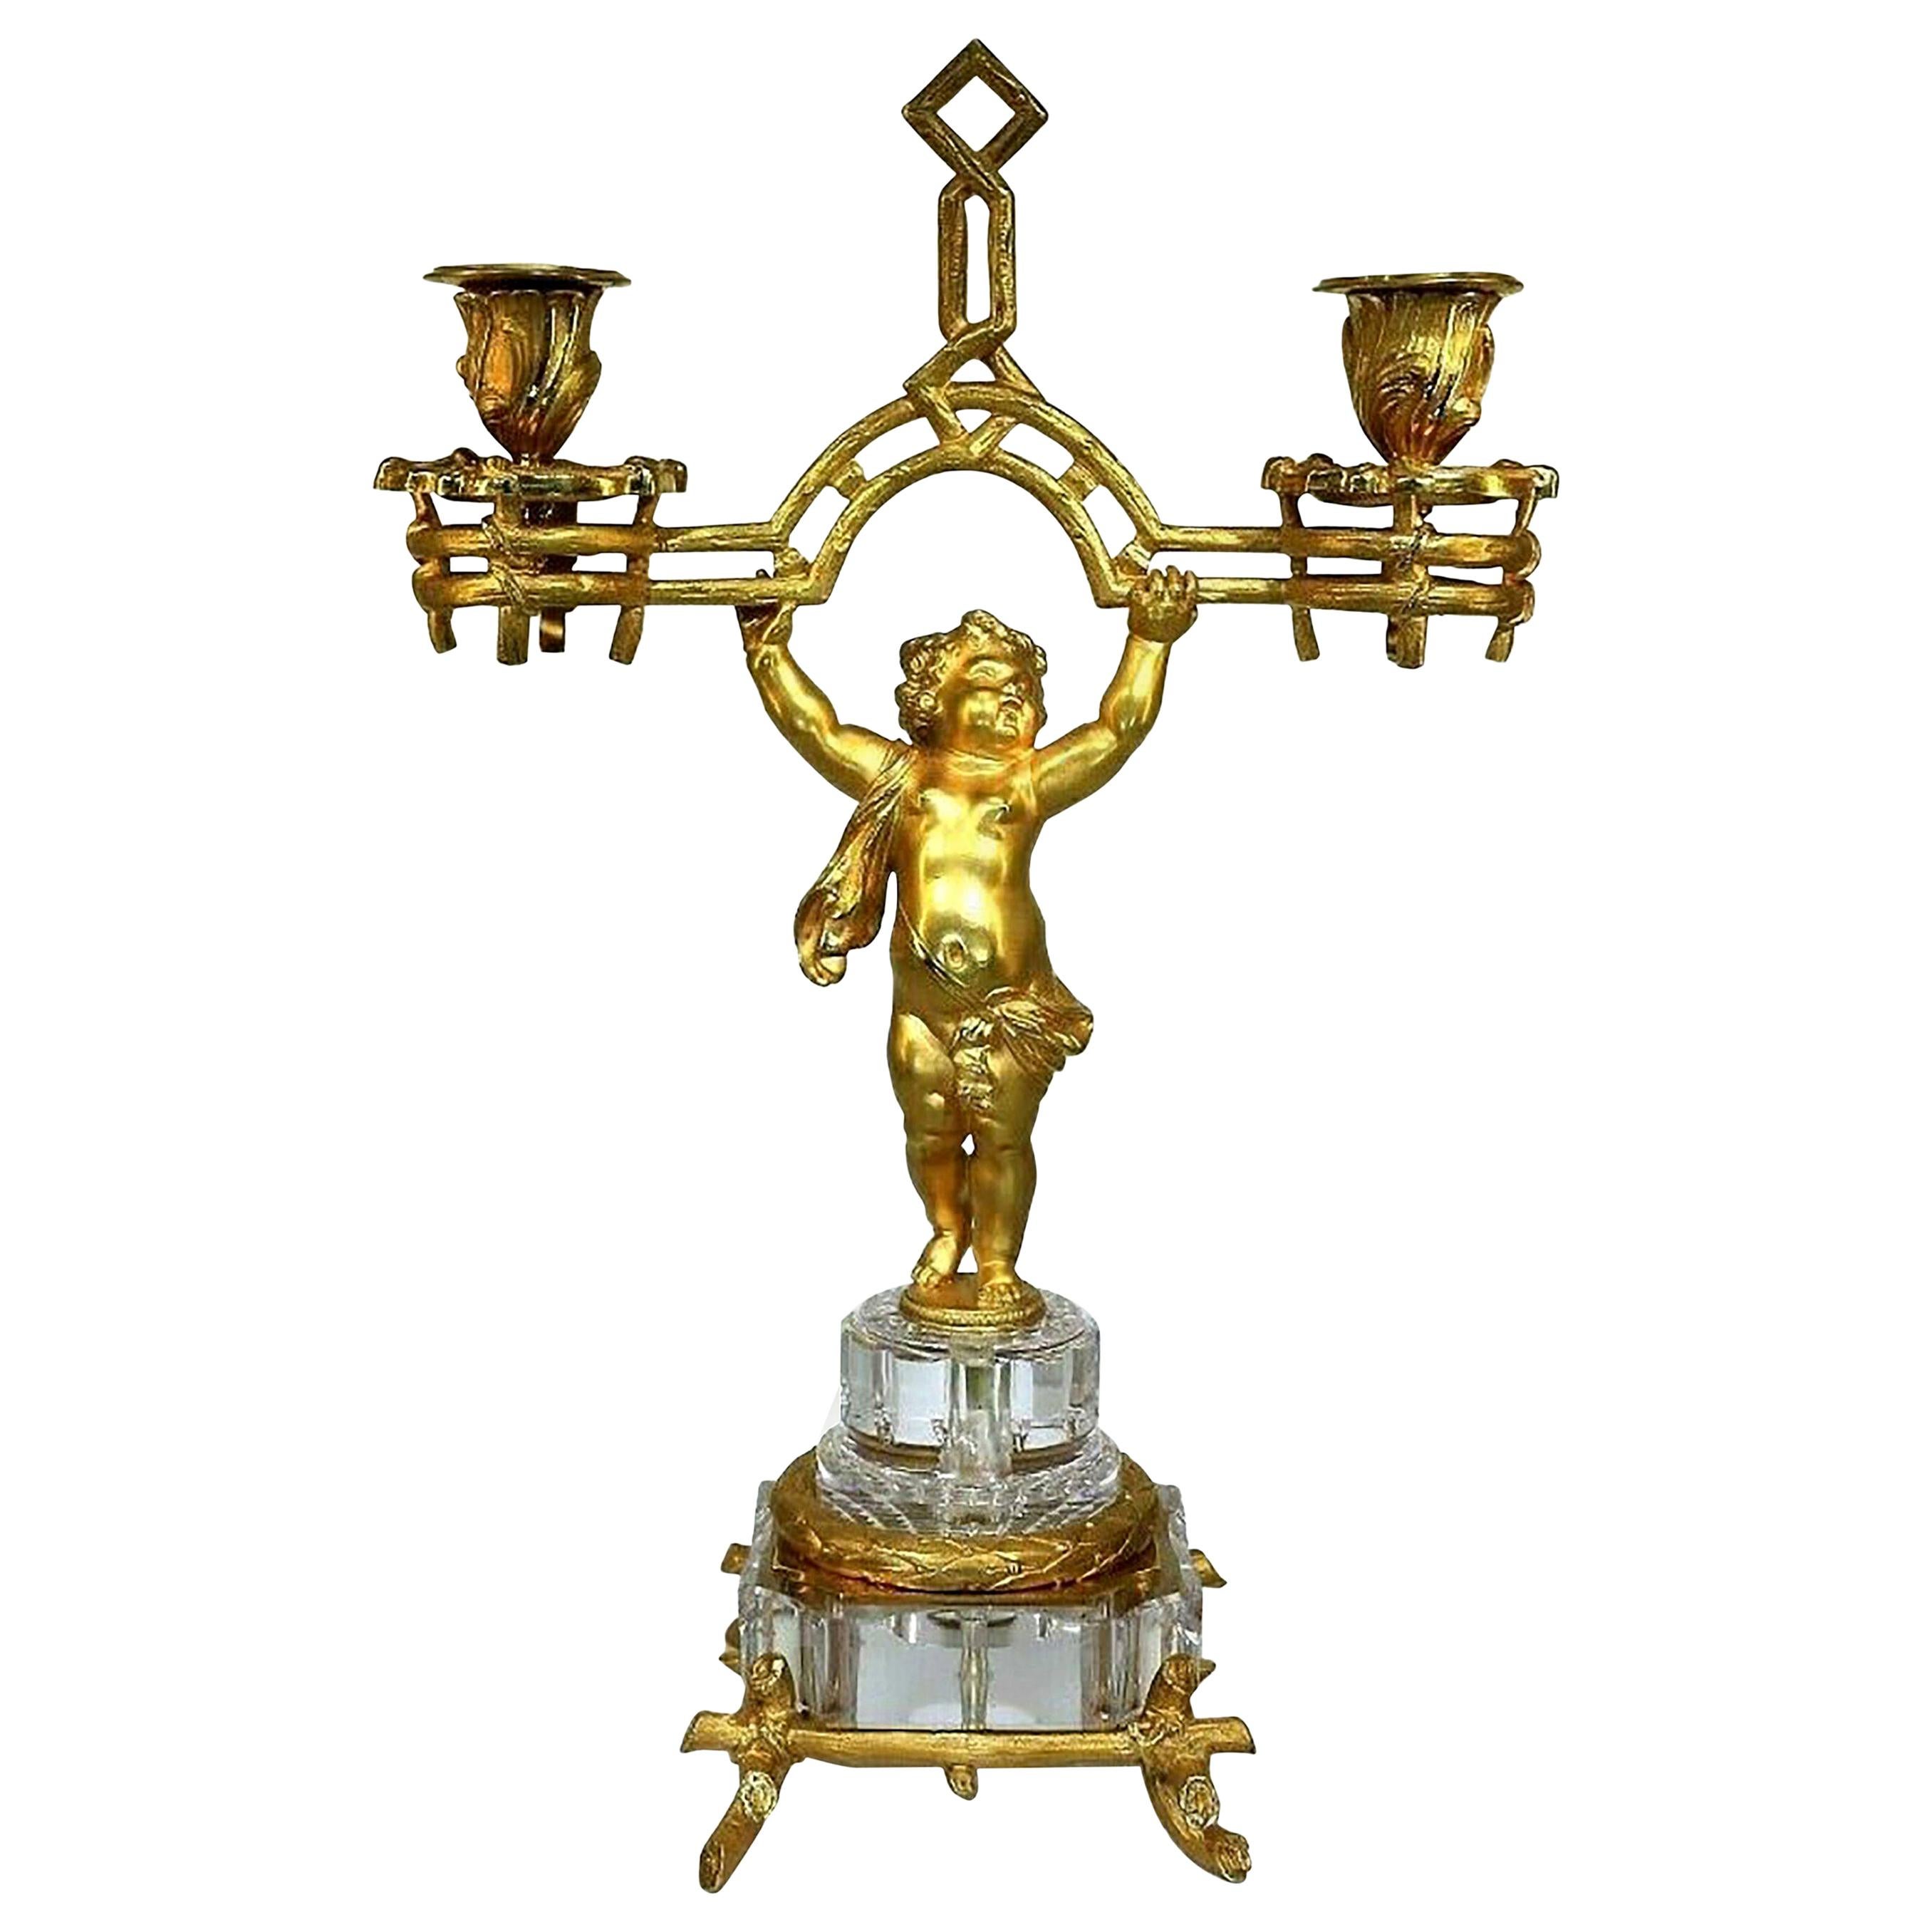 Baccarat bronze chandelier bronze, fire-gilded, partially polished. Elaborately cut crystal glass.
Two-armed shape, shaft as a standing putto on a glass base and plinth, this held with a knot-like and wreath-like mounting.

Baccarat and company